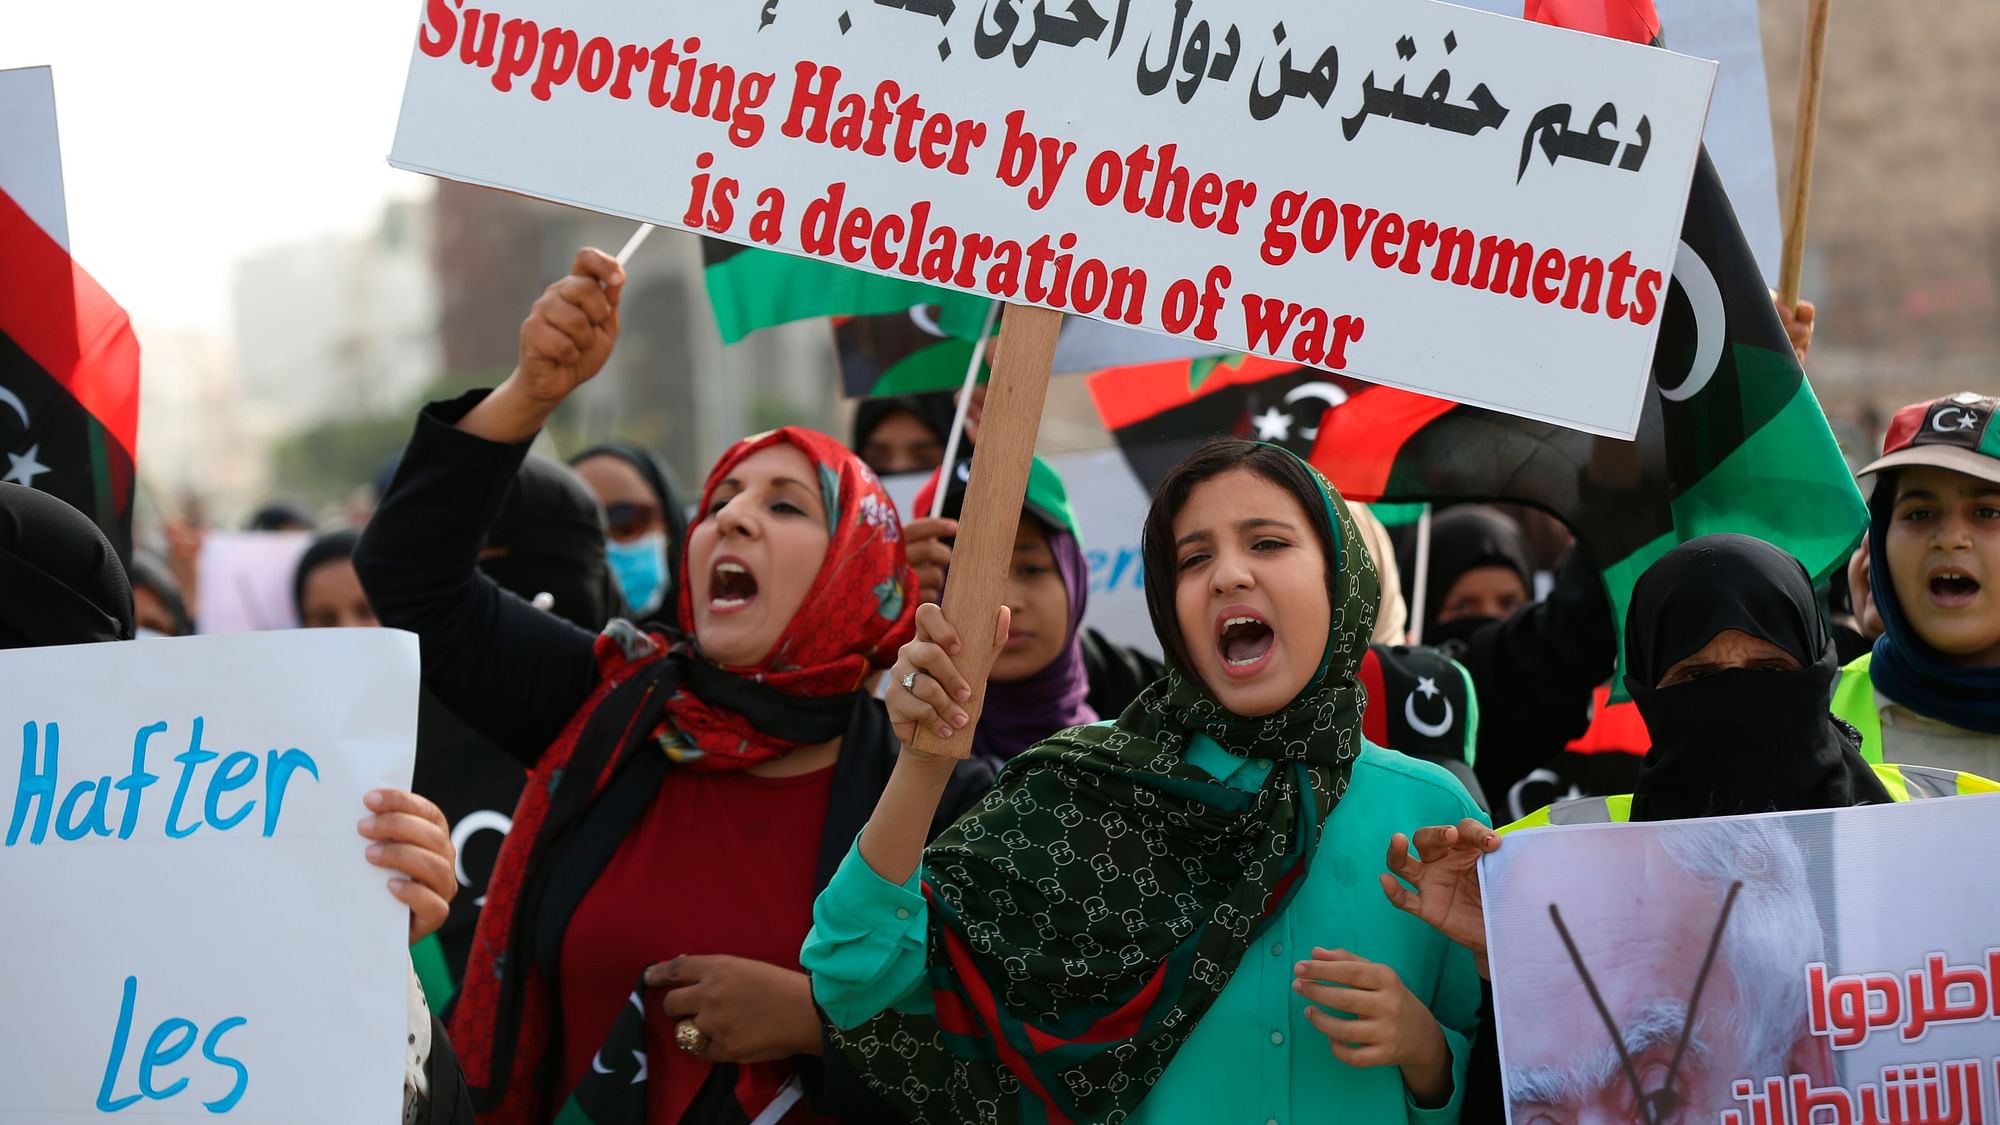 Protesters march chant slogans against military operations by Field Marshal Khalifa Hifter’s forces in Martyrs’ Square on in Tripoli, Libya on Friday, April 26, 2019.